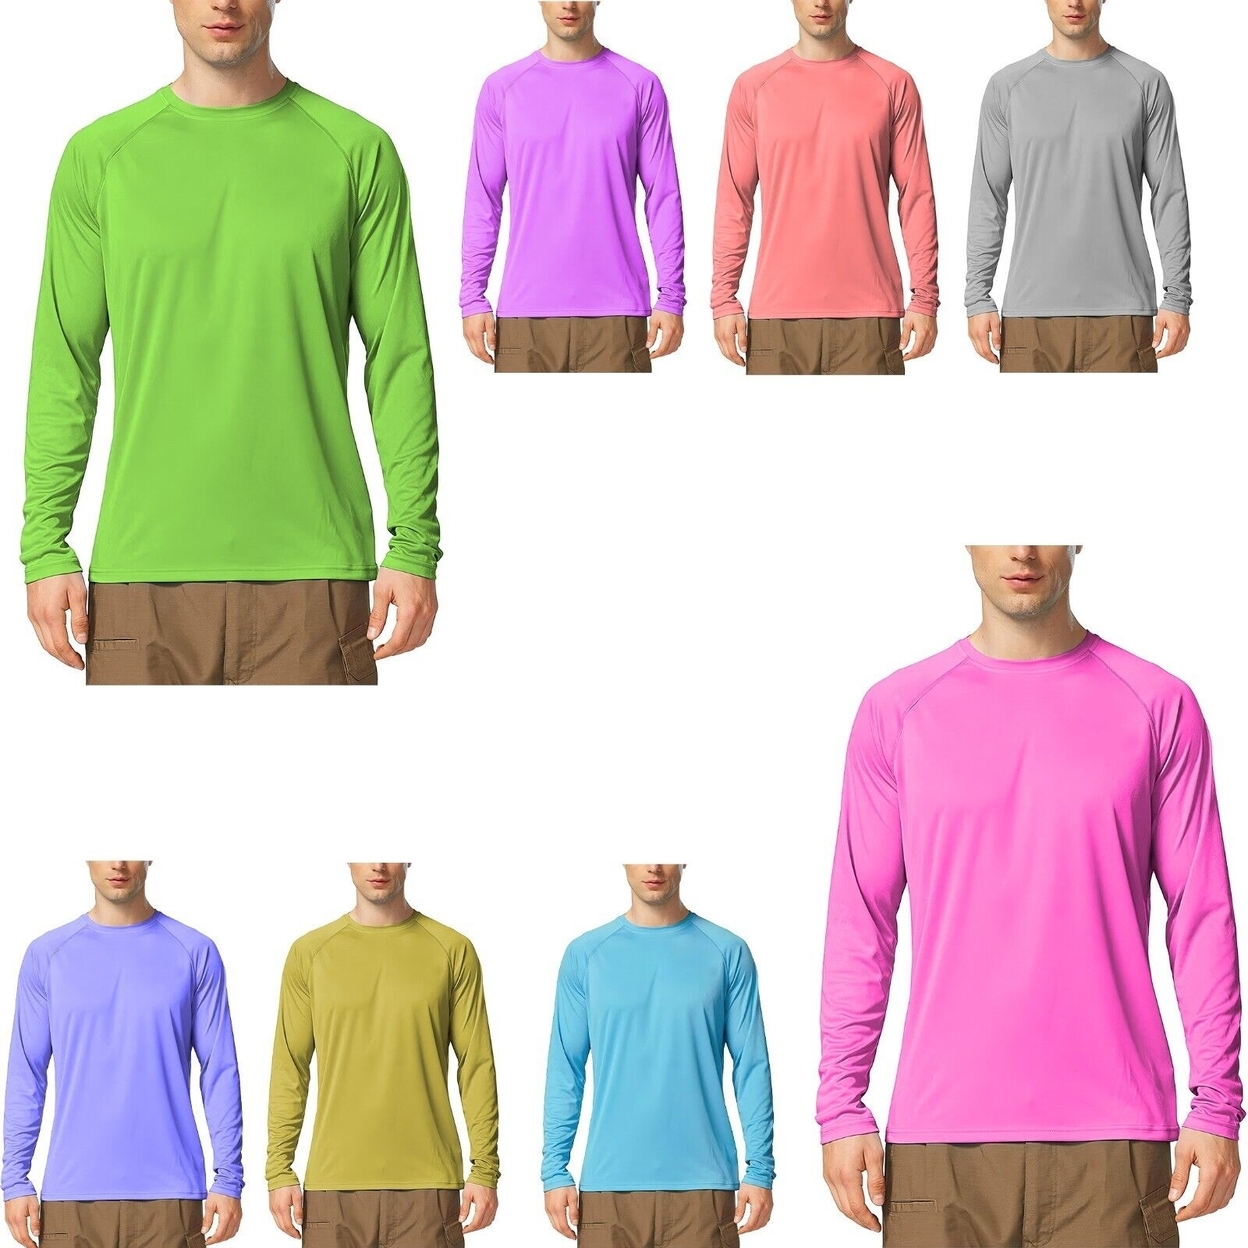 4-Pack: Men's Dri-Fit Moisture Wicking Athletic Cool Performance Slim Fit Long Sleeve T-Shirts - X-large